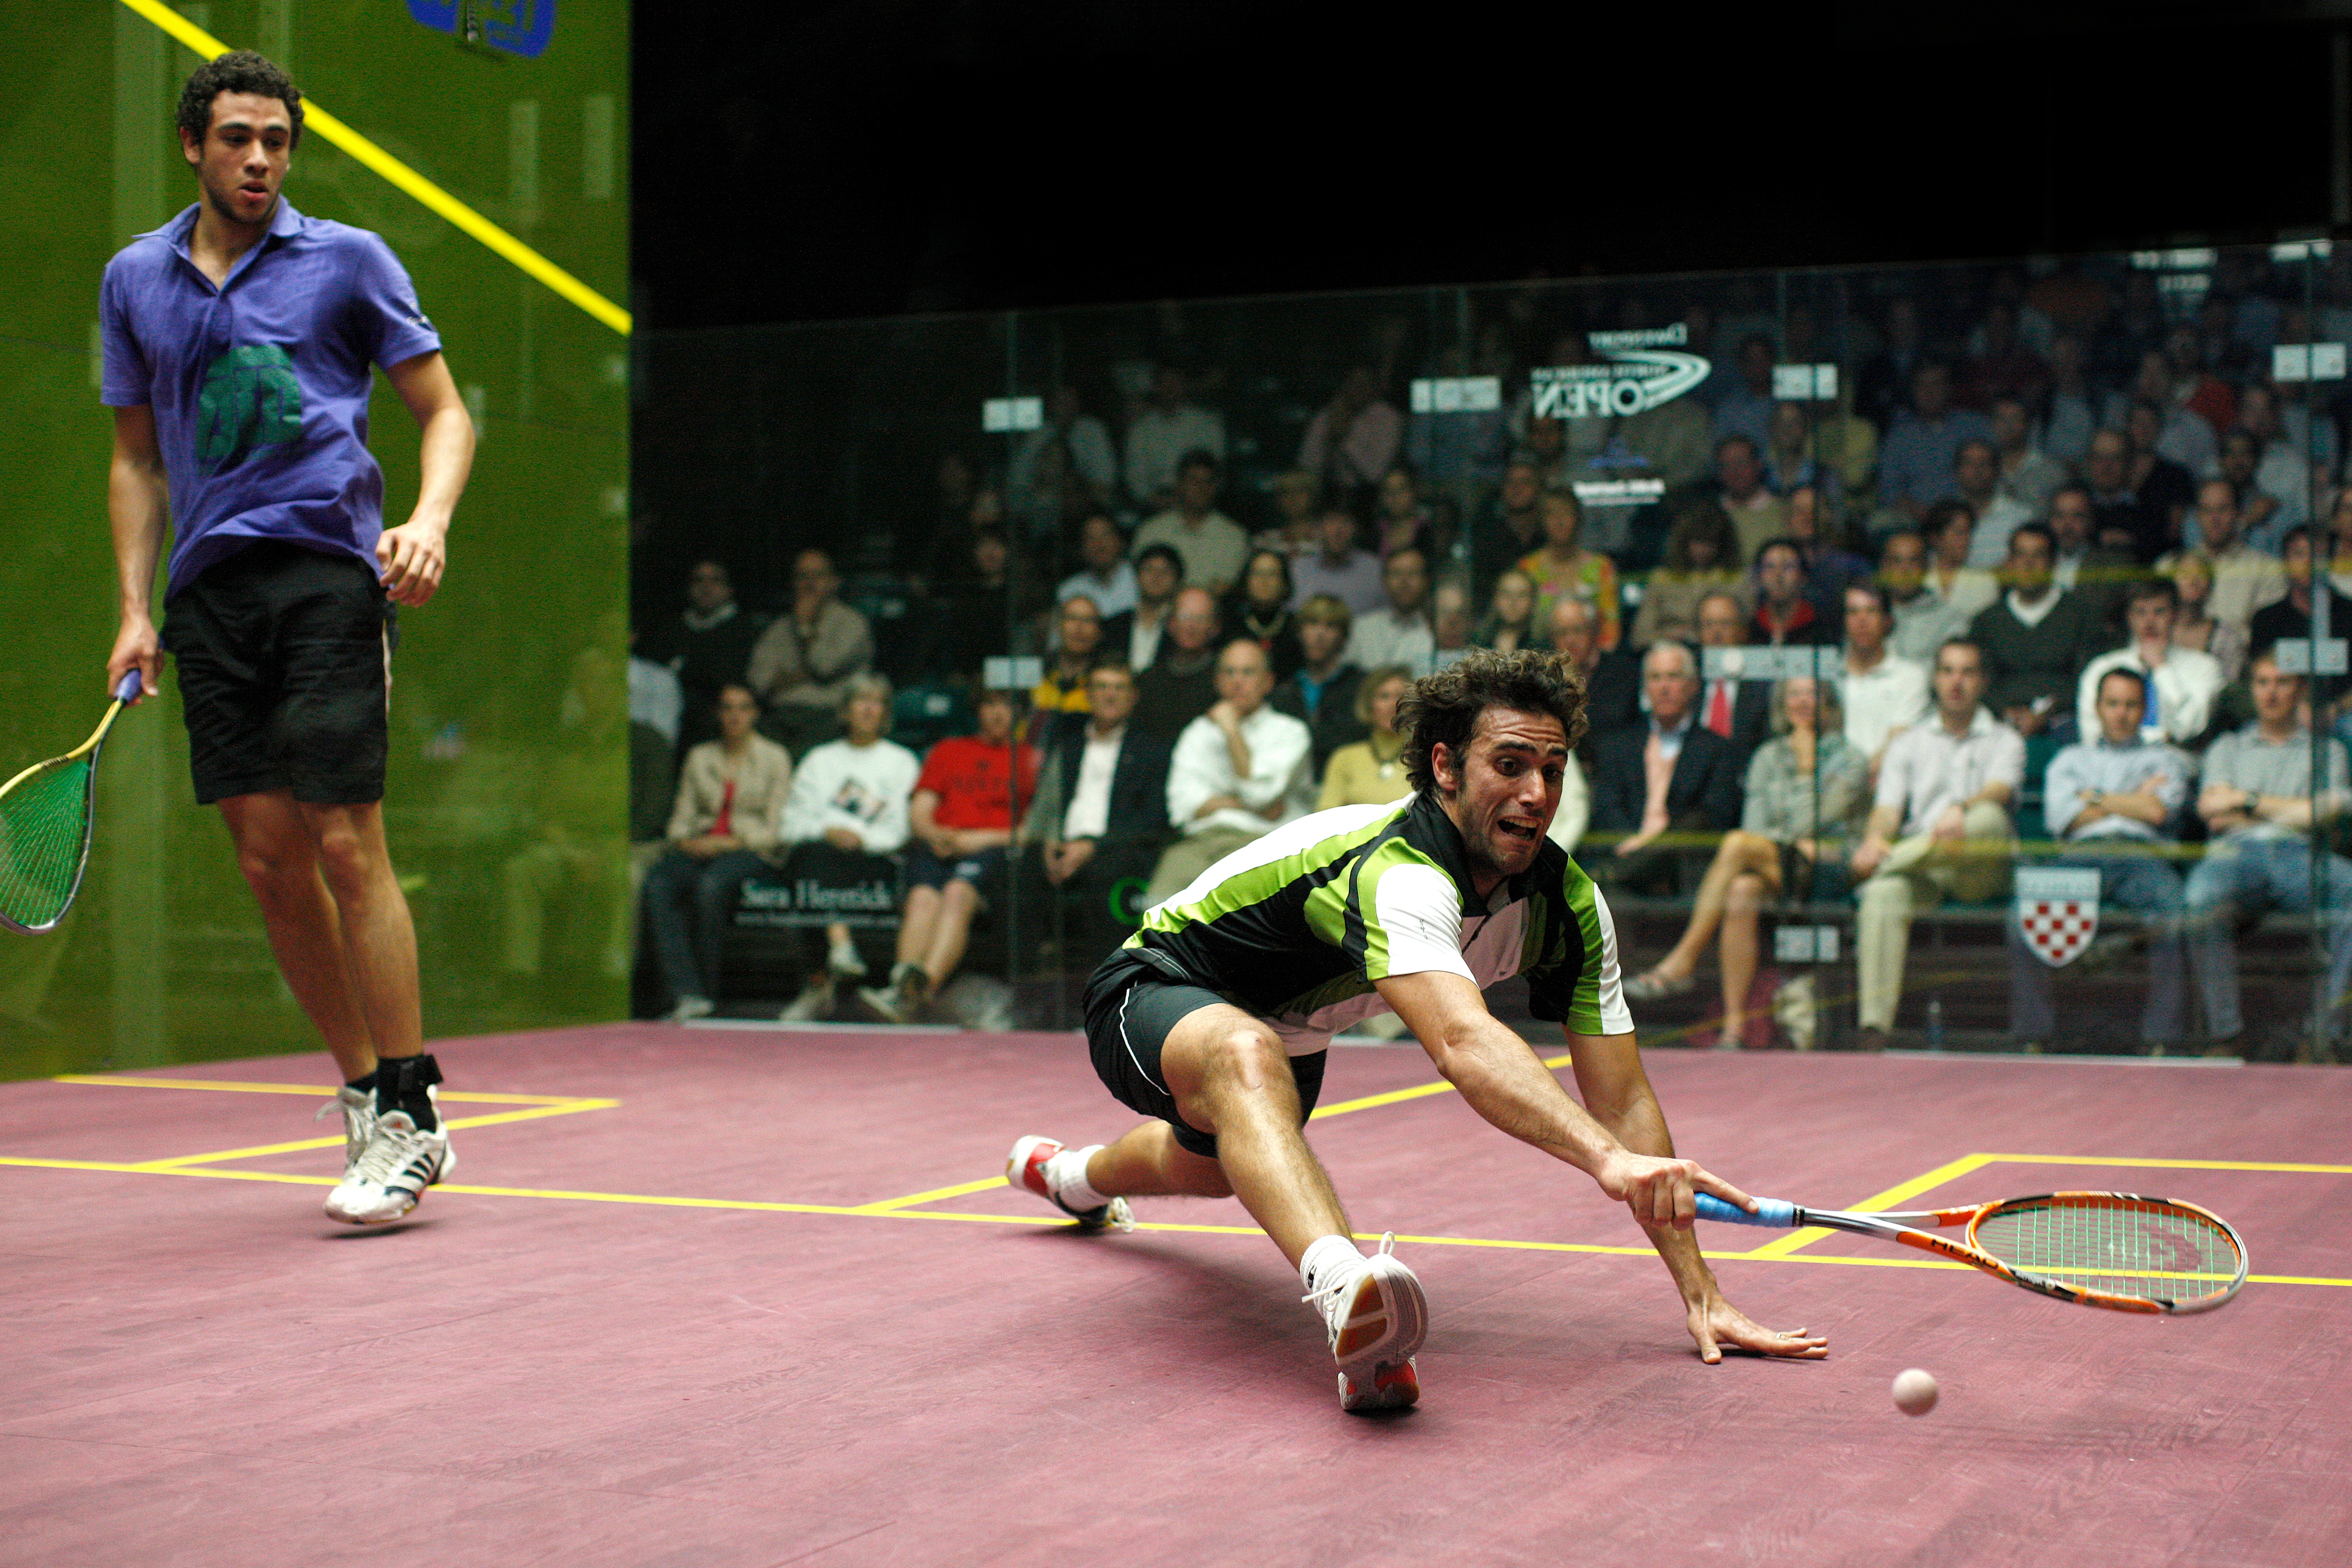 Last year, Karim Darwish (R) beat the top-seeded Ramy Ashour in a five-game quarterfinal, but this year Ashour turned the tables by beating Darwish (seeded No. 1) in a five-game semifinal. In the finals